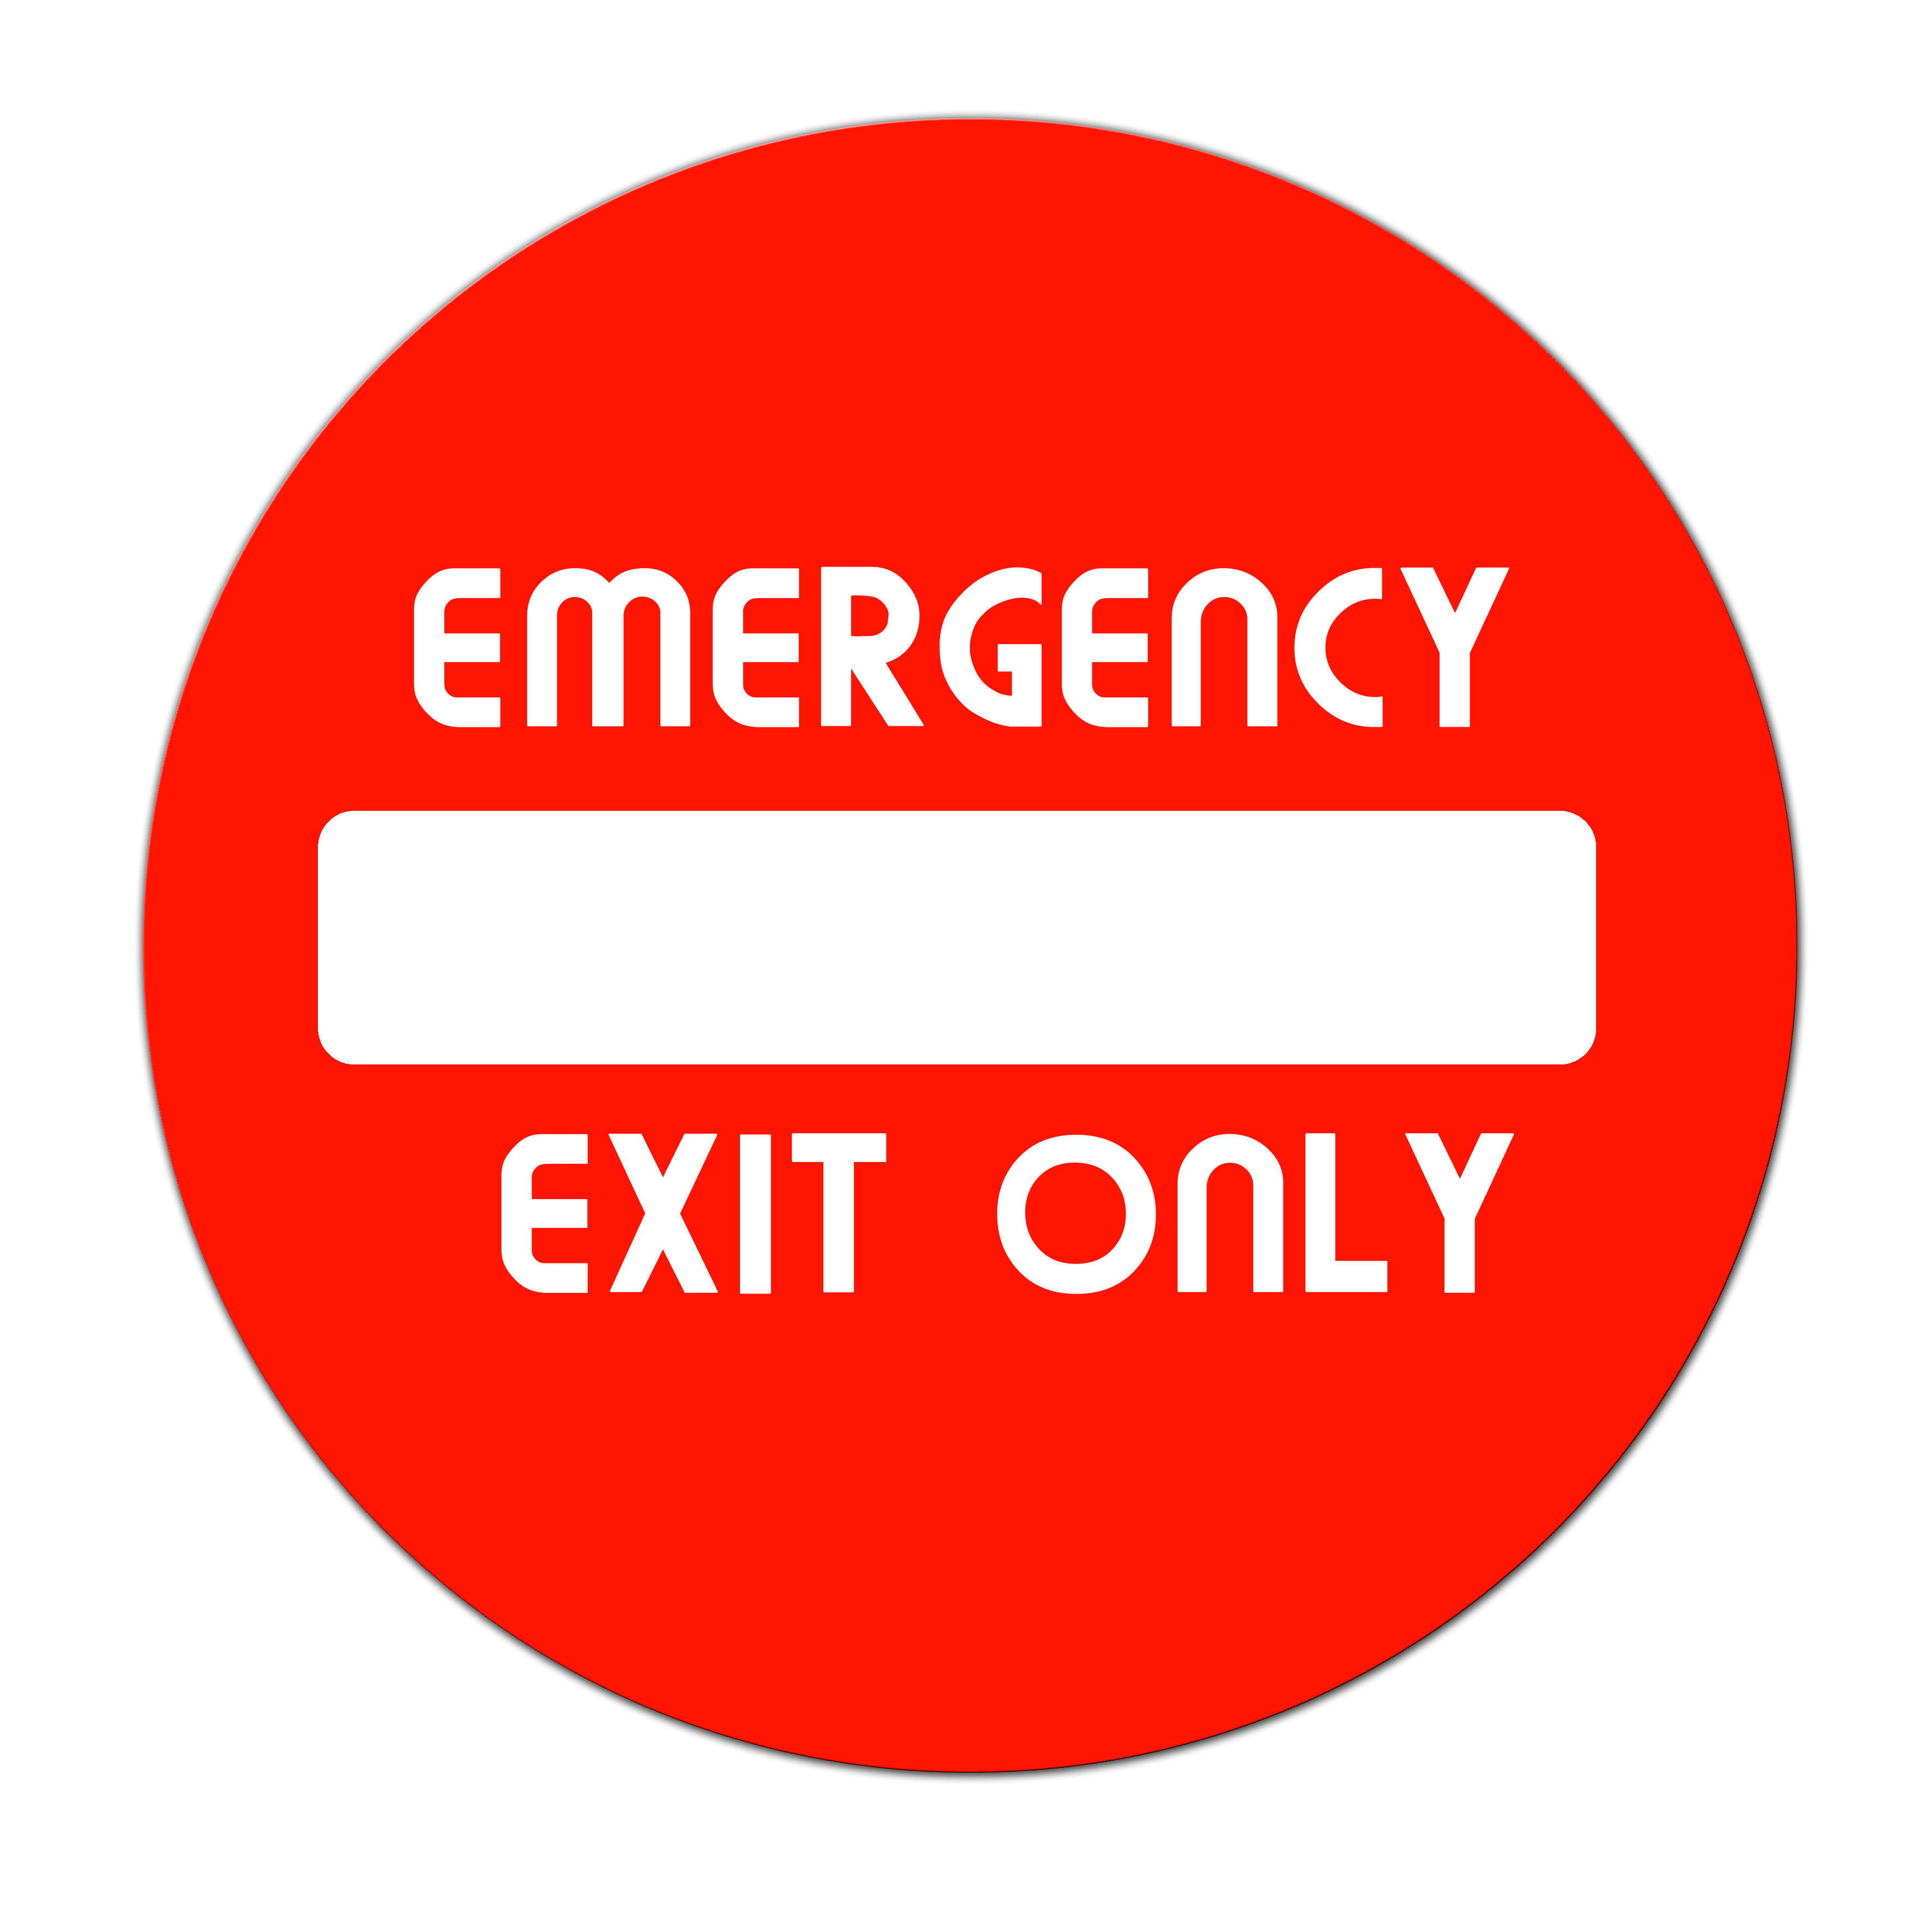 Emergency Exit Sign Free Image Download 0011